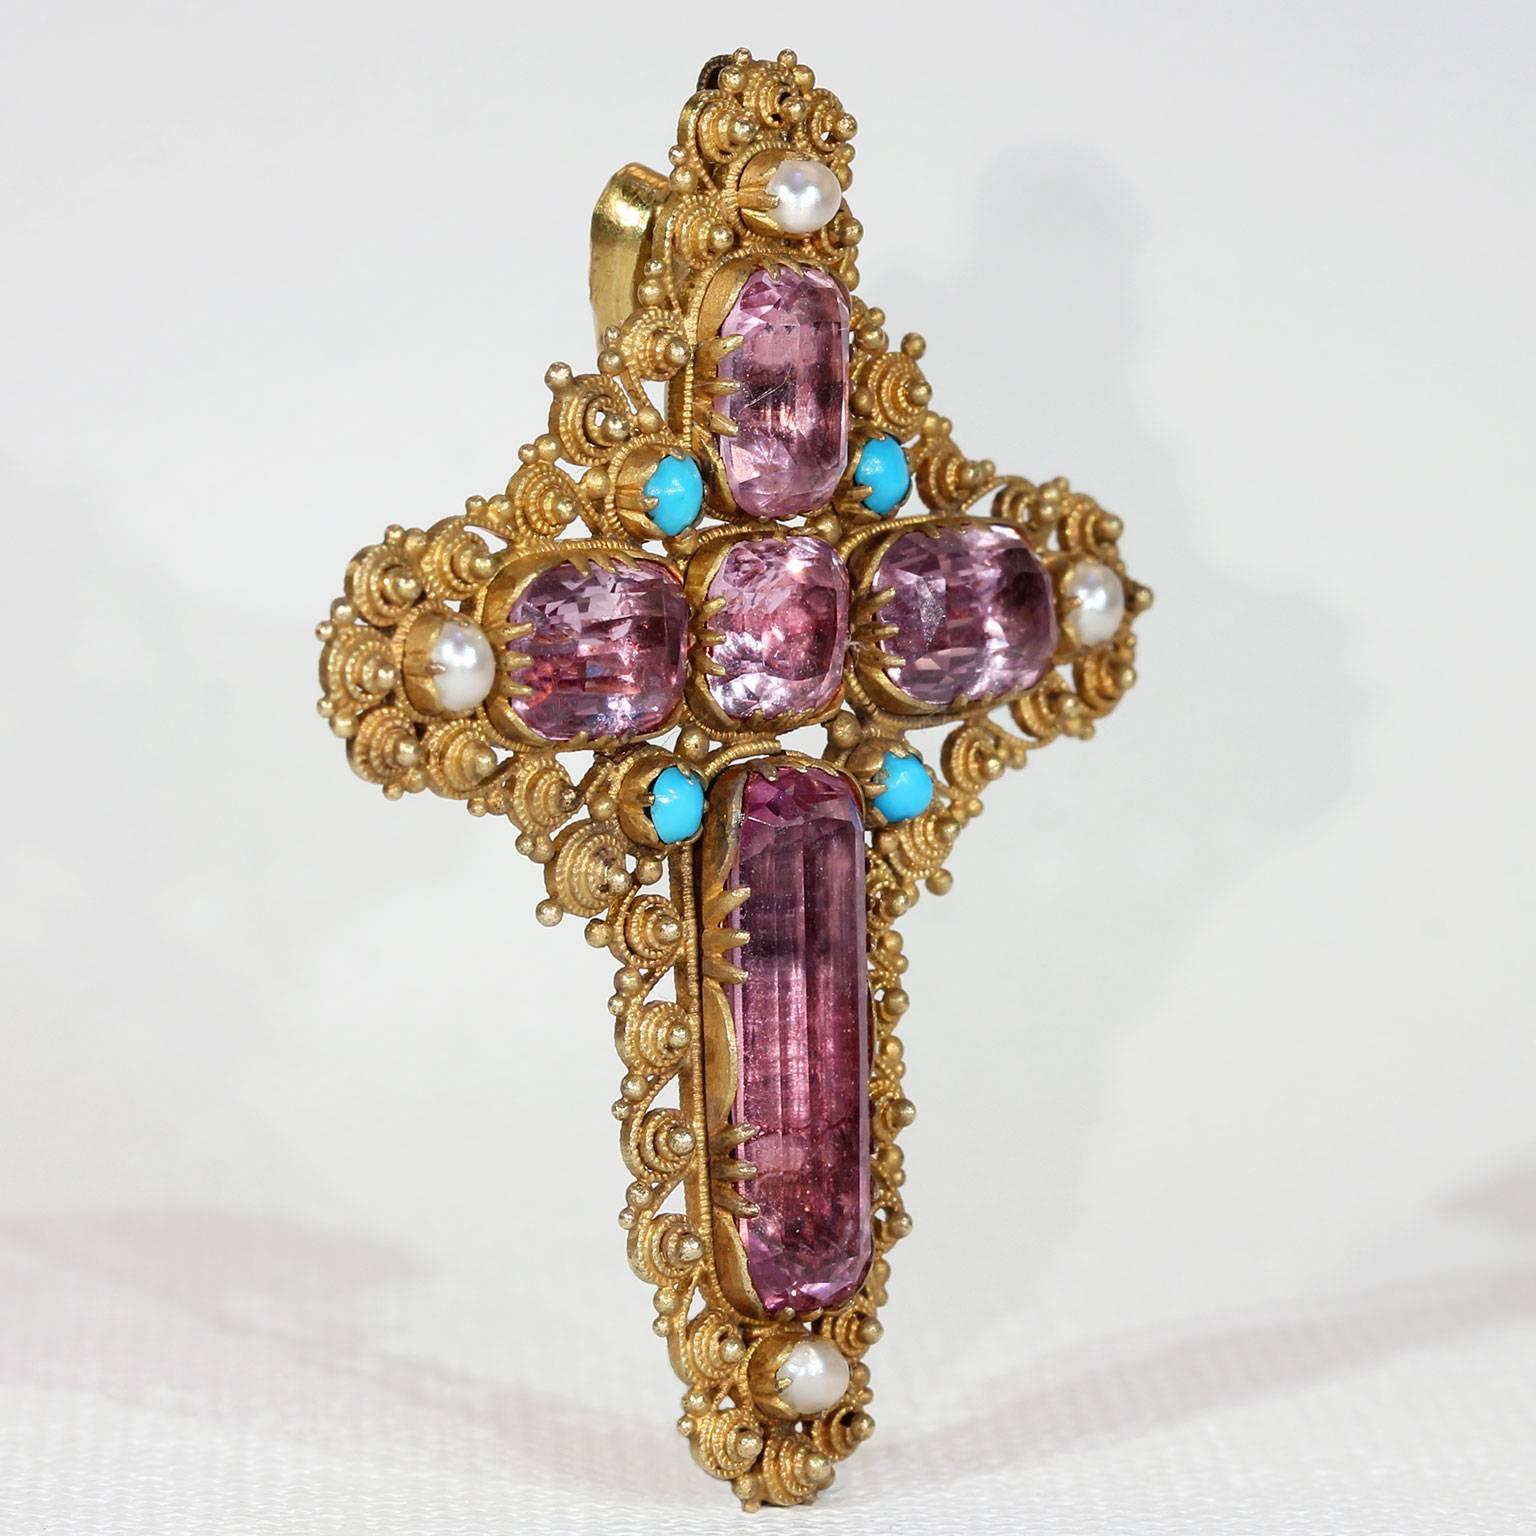 The Georgian Era saw quite a few upheavals in fashion and culture in its 100 + year history. Topaz was a popular gemstone throughout the era, along with garnets, emeralds, rubies, pearls, and turquoise. Crosses and crucifixes were also in favor.